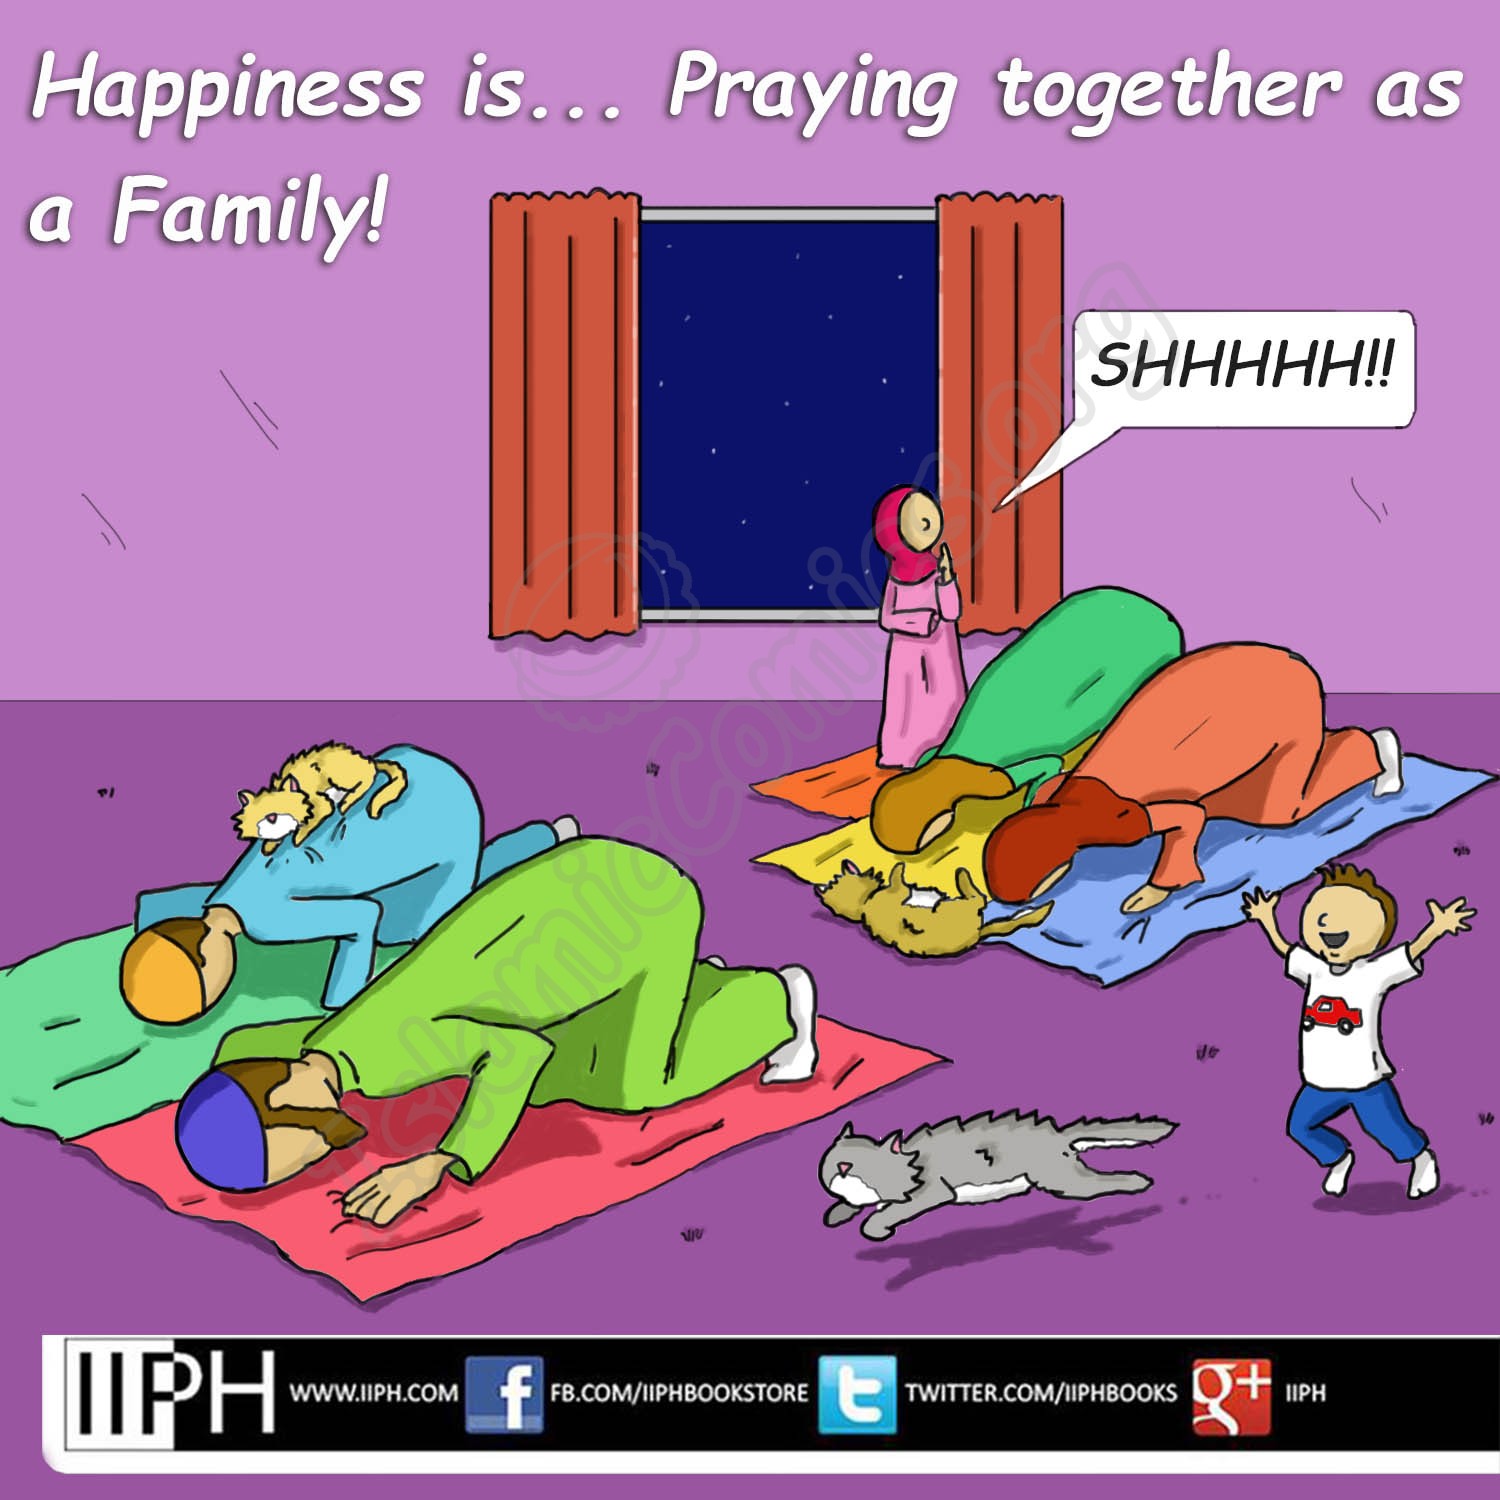 Happiness is... Praying Together as a Family - Islamic Illustrations (Islamic Comics)